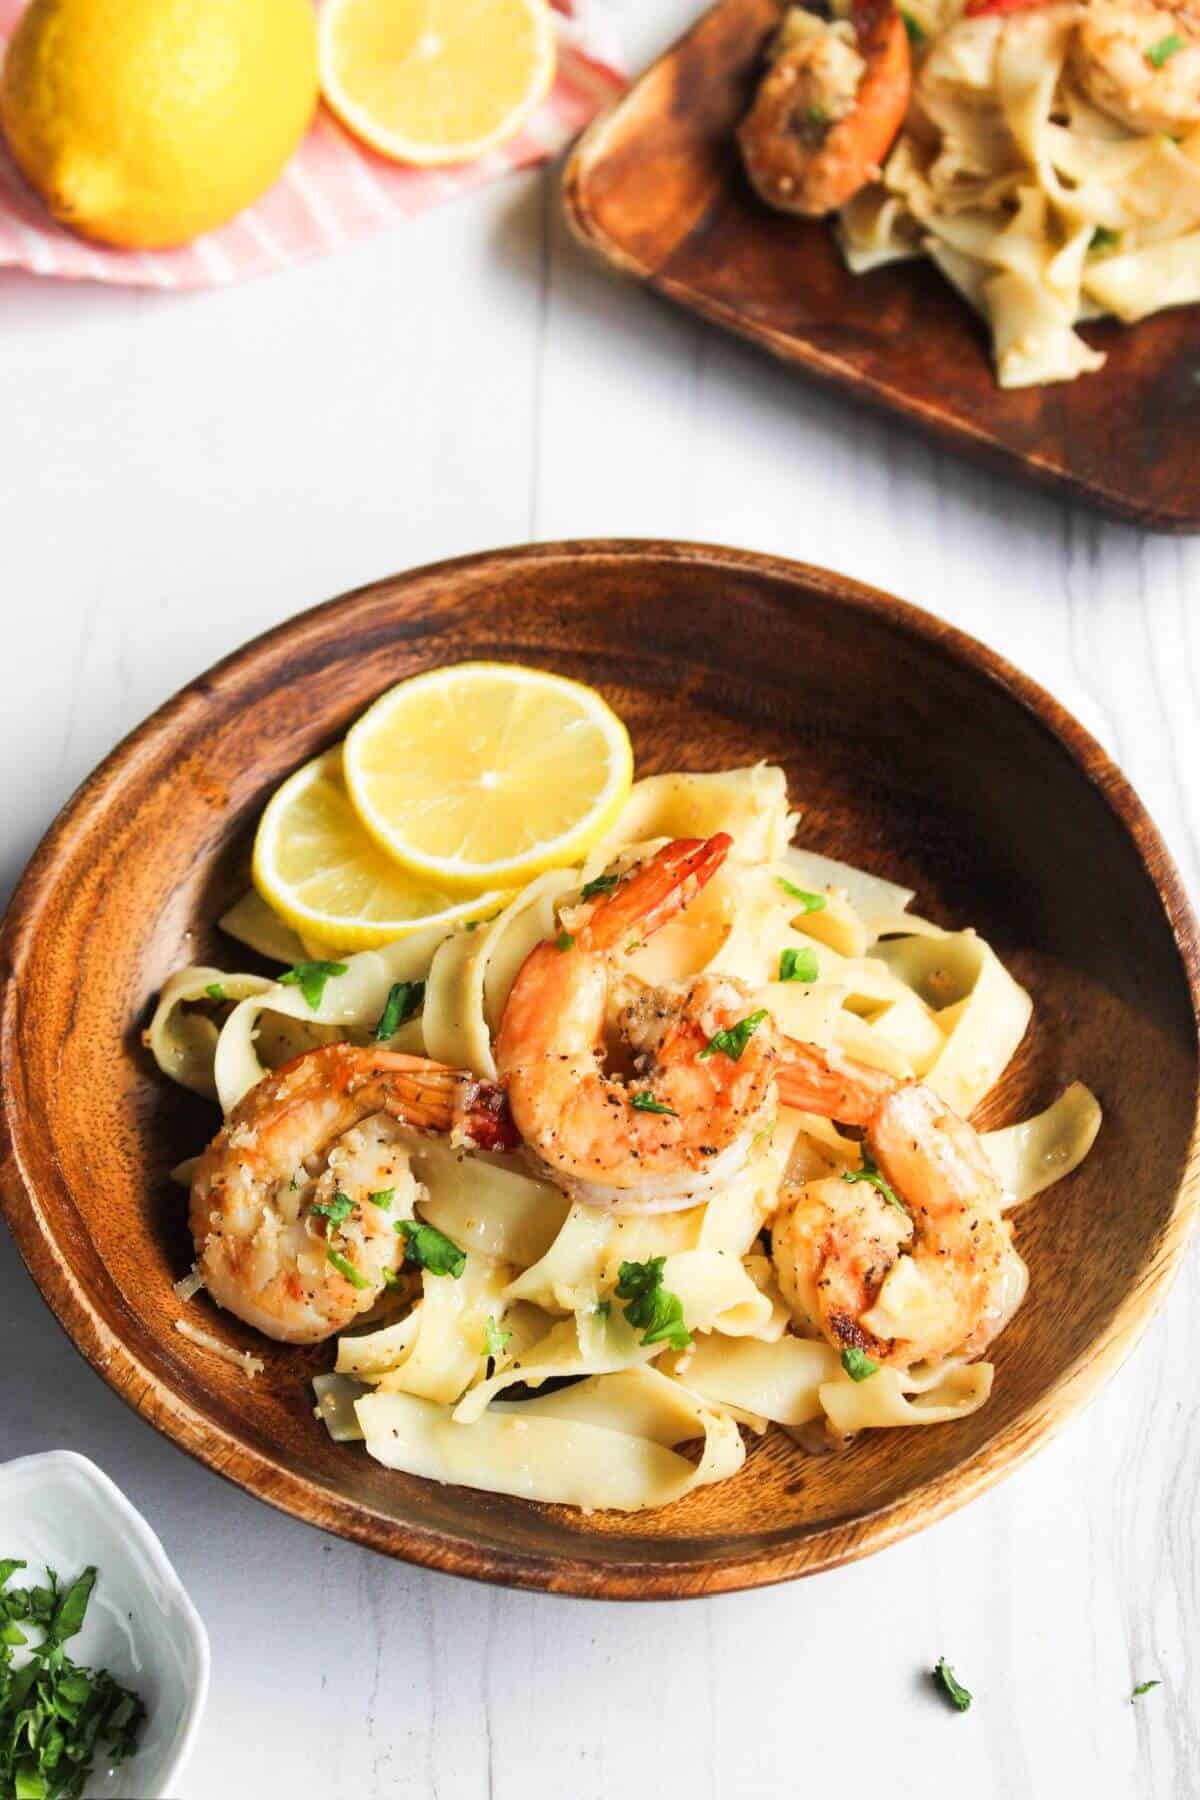 A bowl of pasta with shrimp and lemon slices.